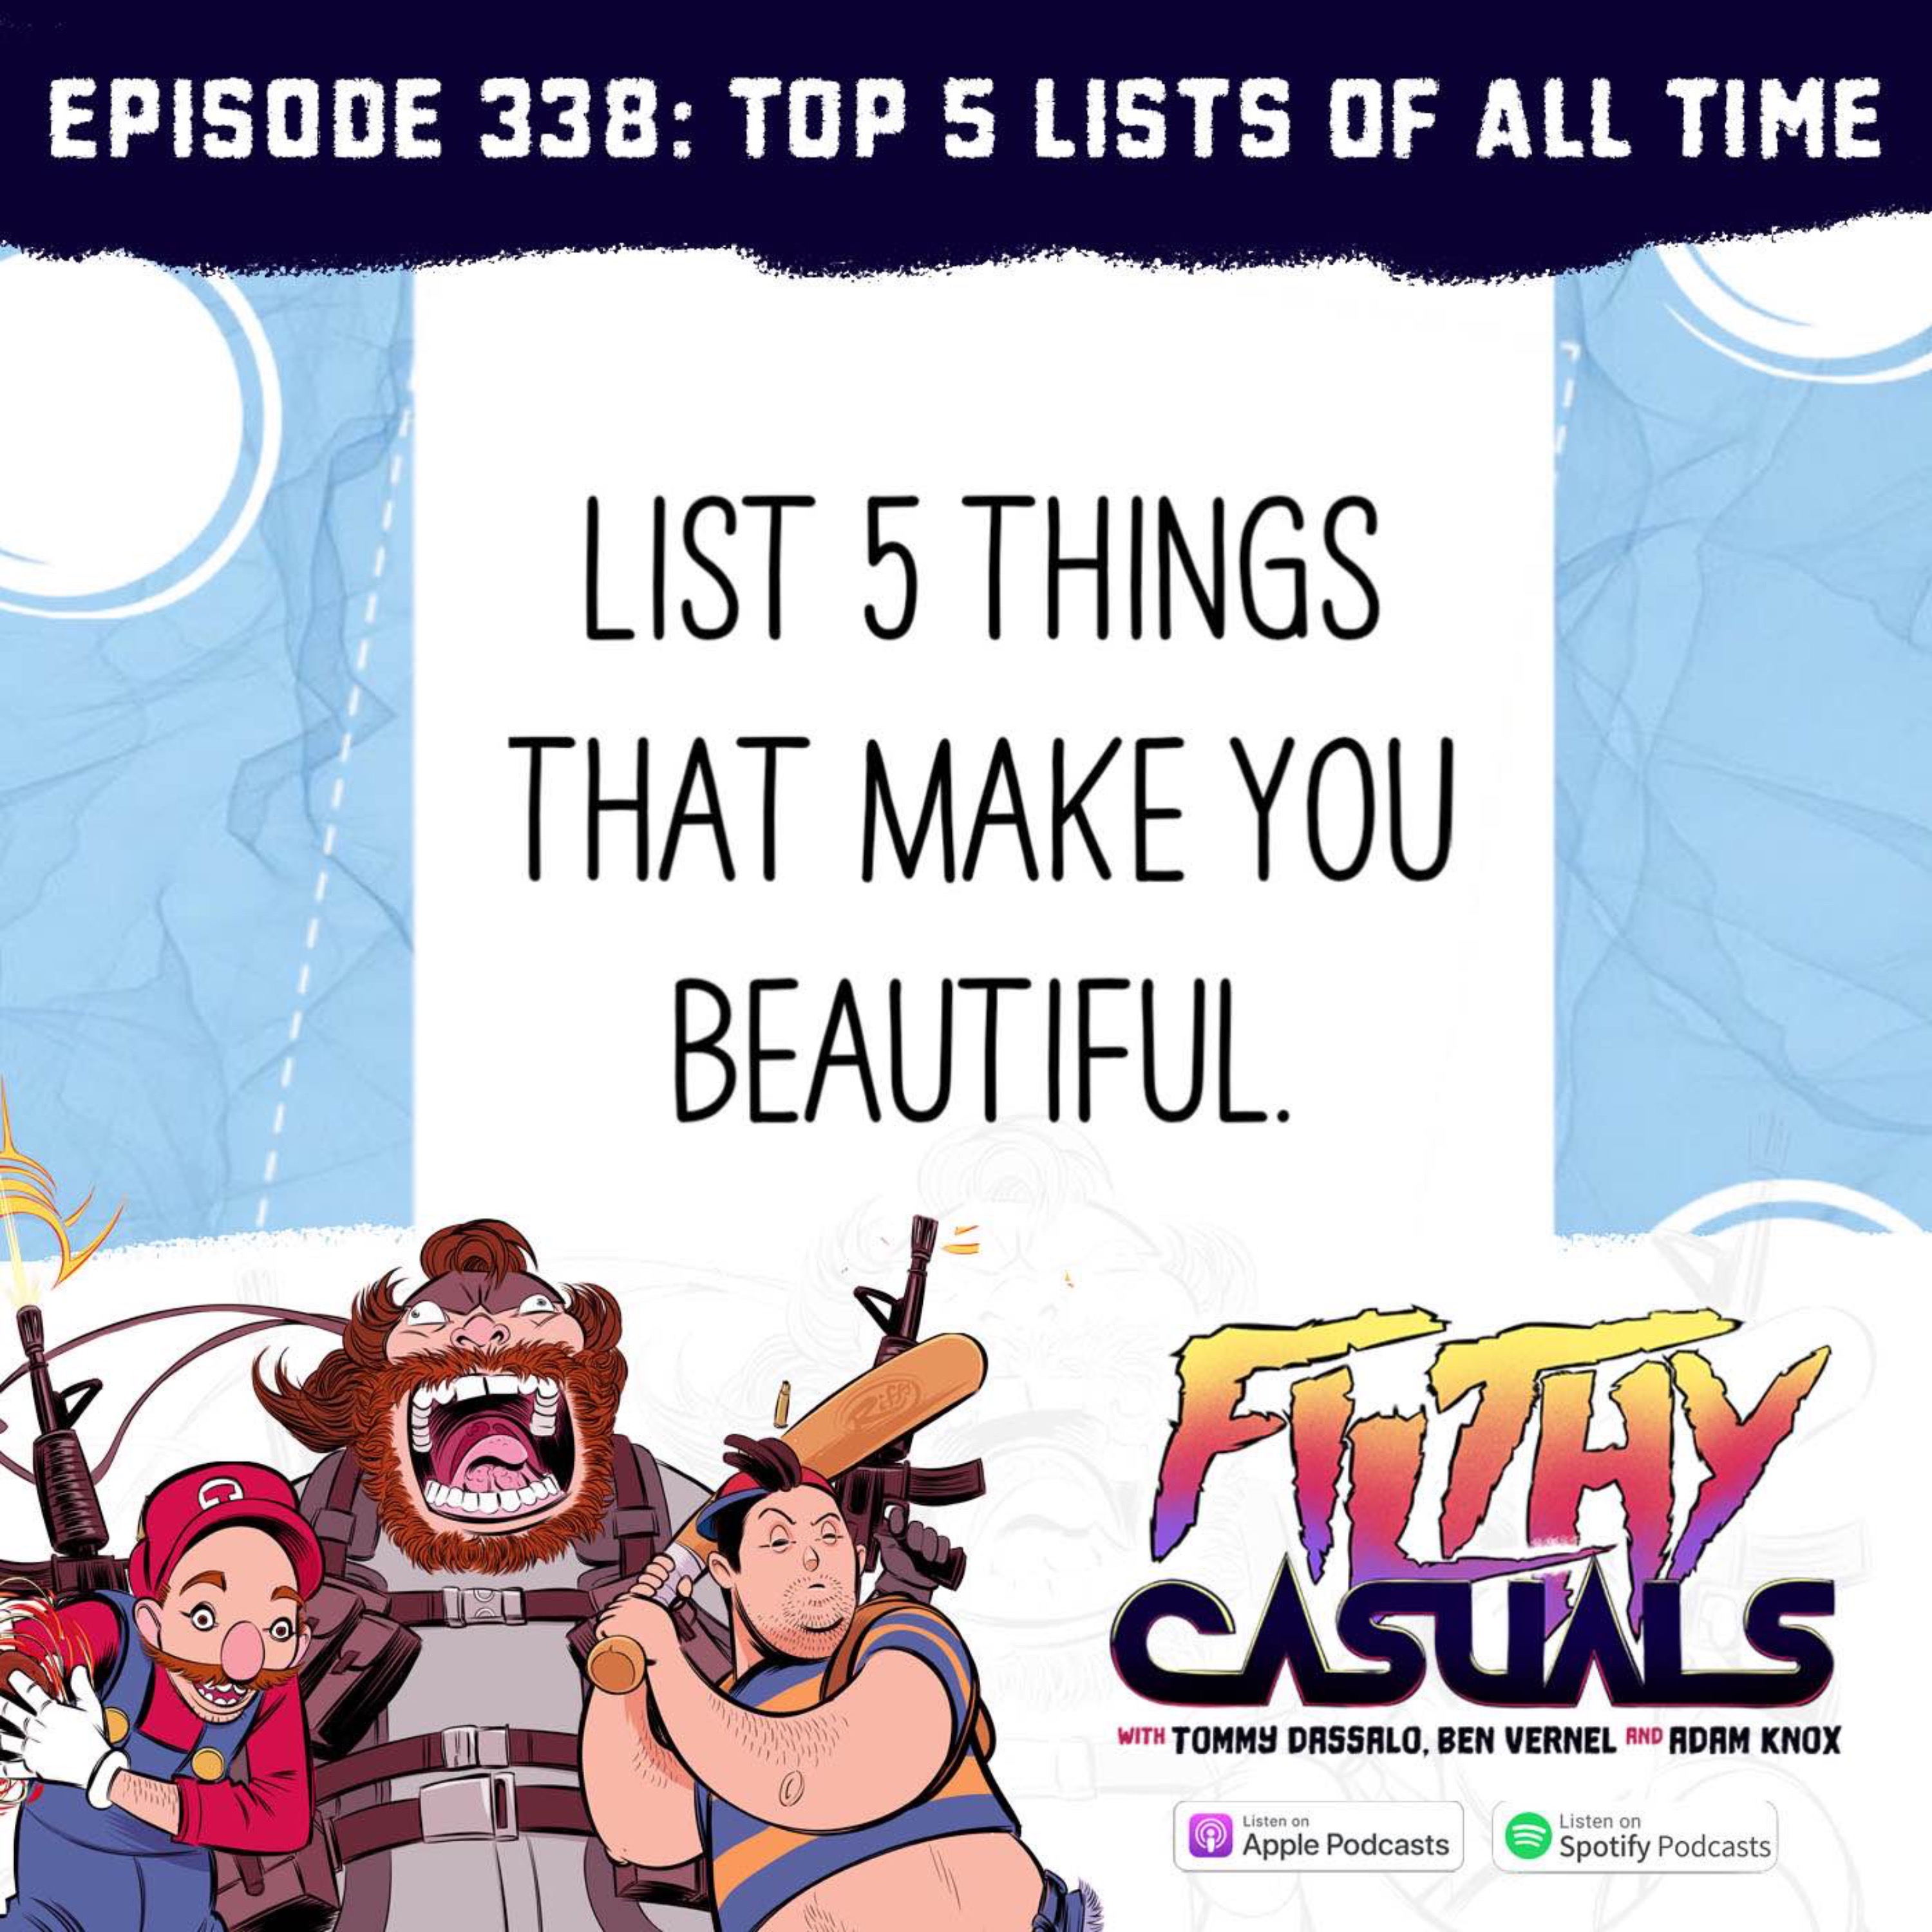 Episode 338: Top 5 Lists of All Time